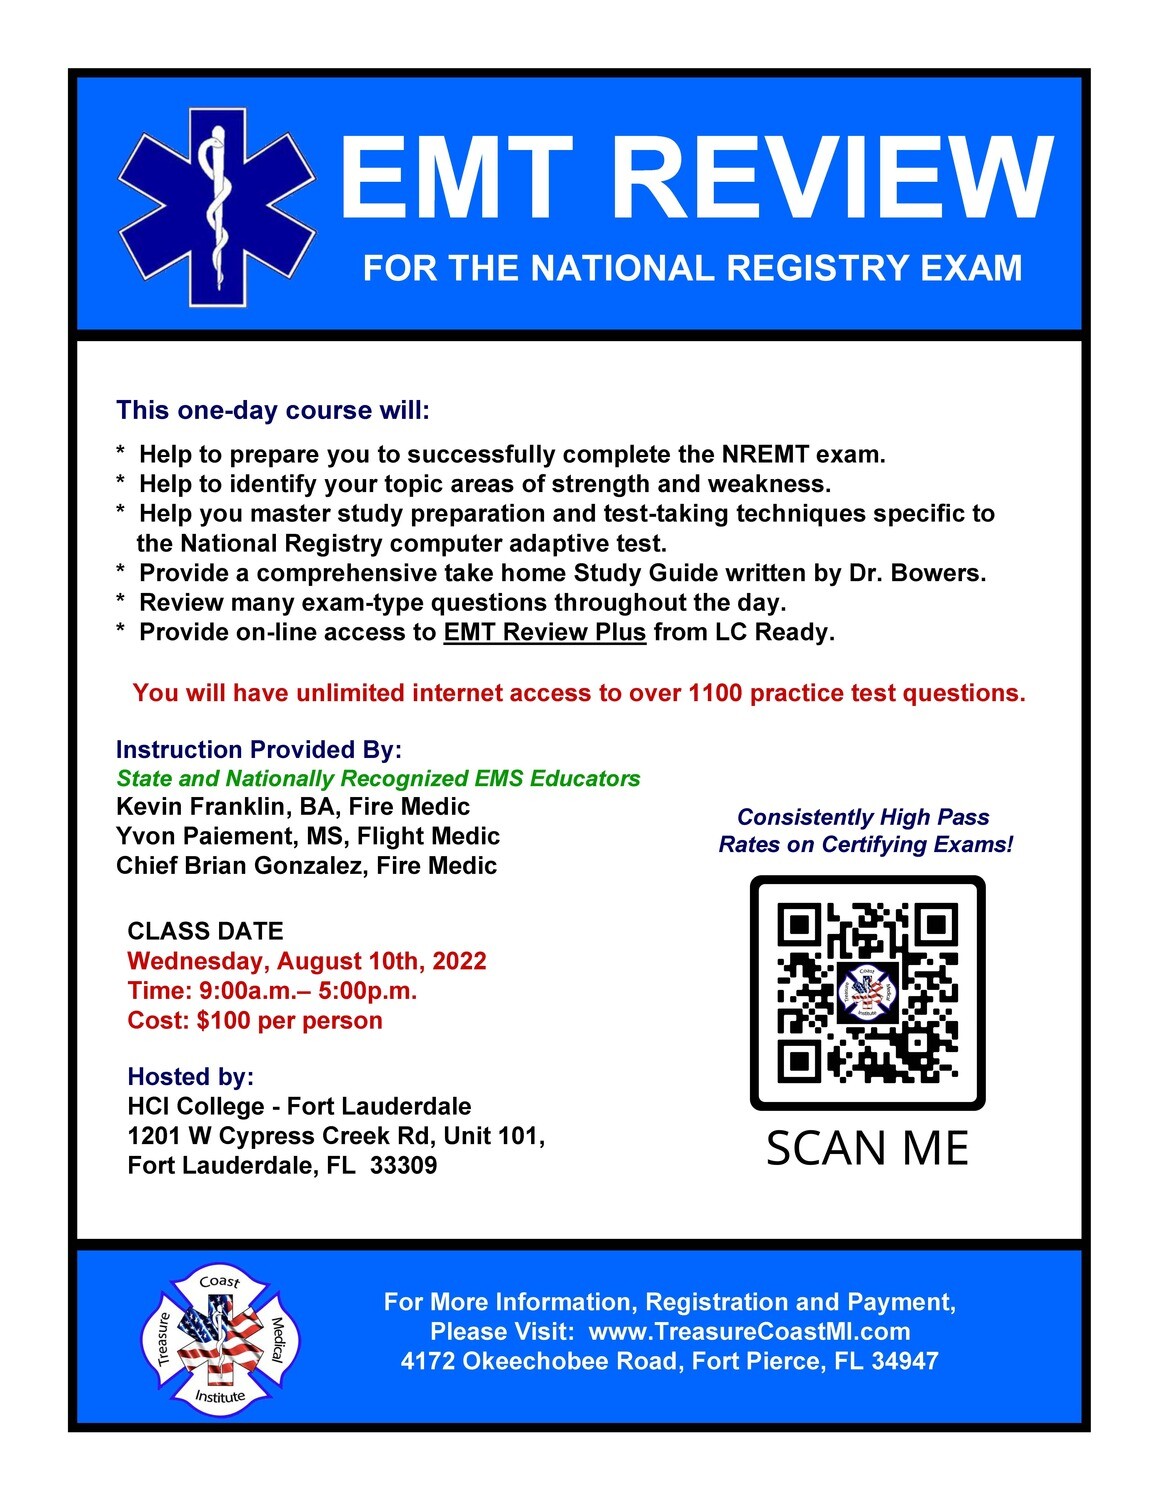 National Registry EMT Exam Review August 10th Fort Lauderdale